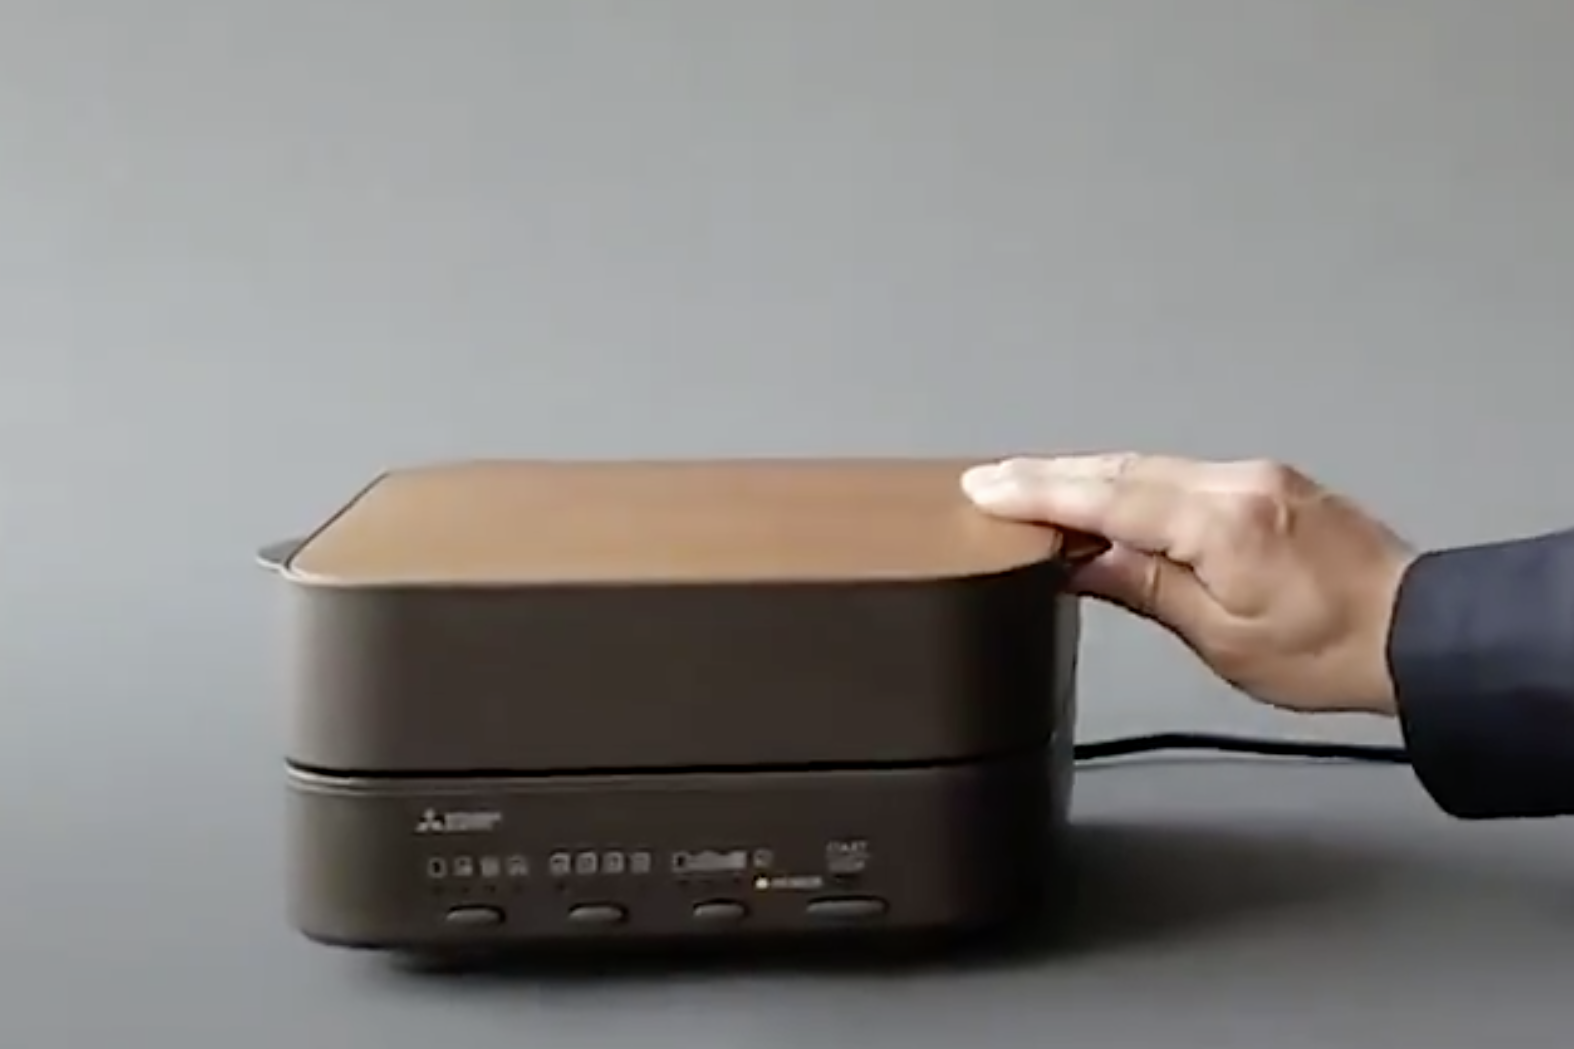 Japanese toaster designed by Mitsubishi costs £215 and makes just one slice  at a time, The Independent